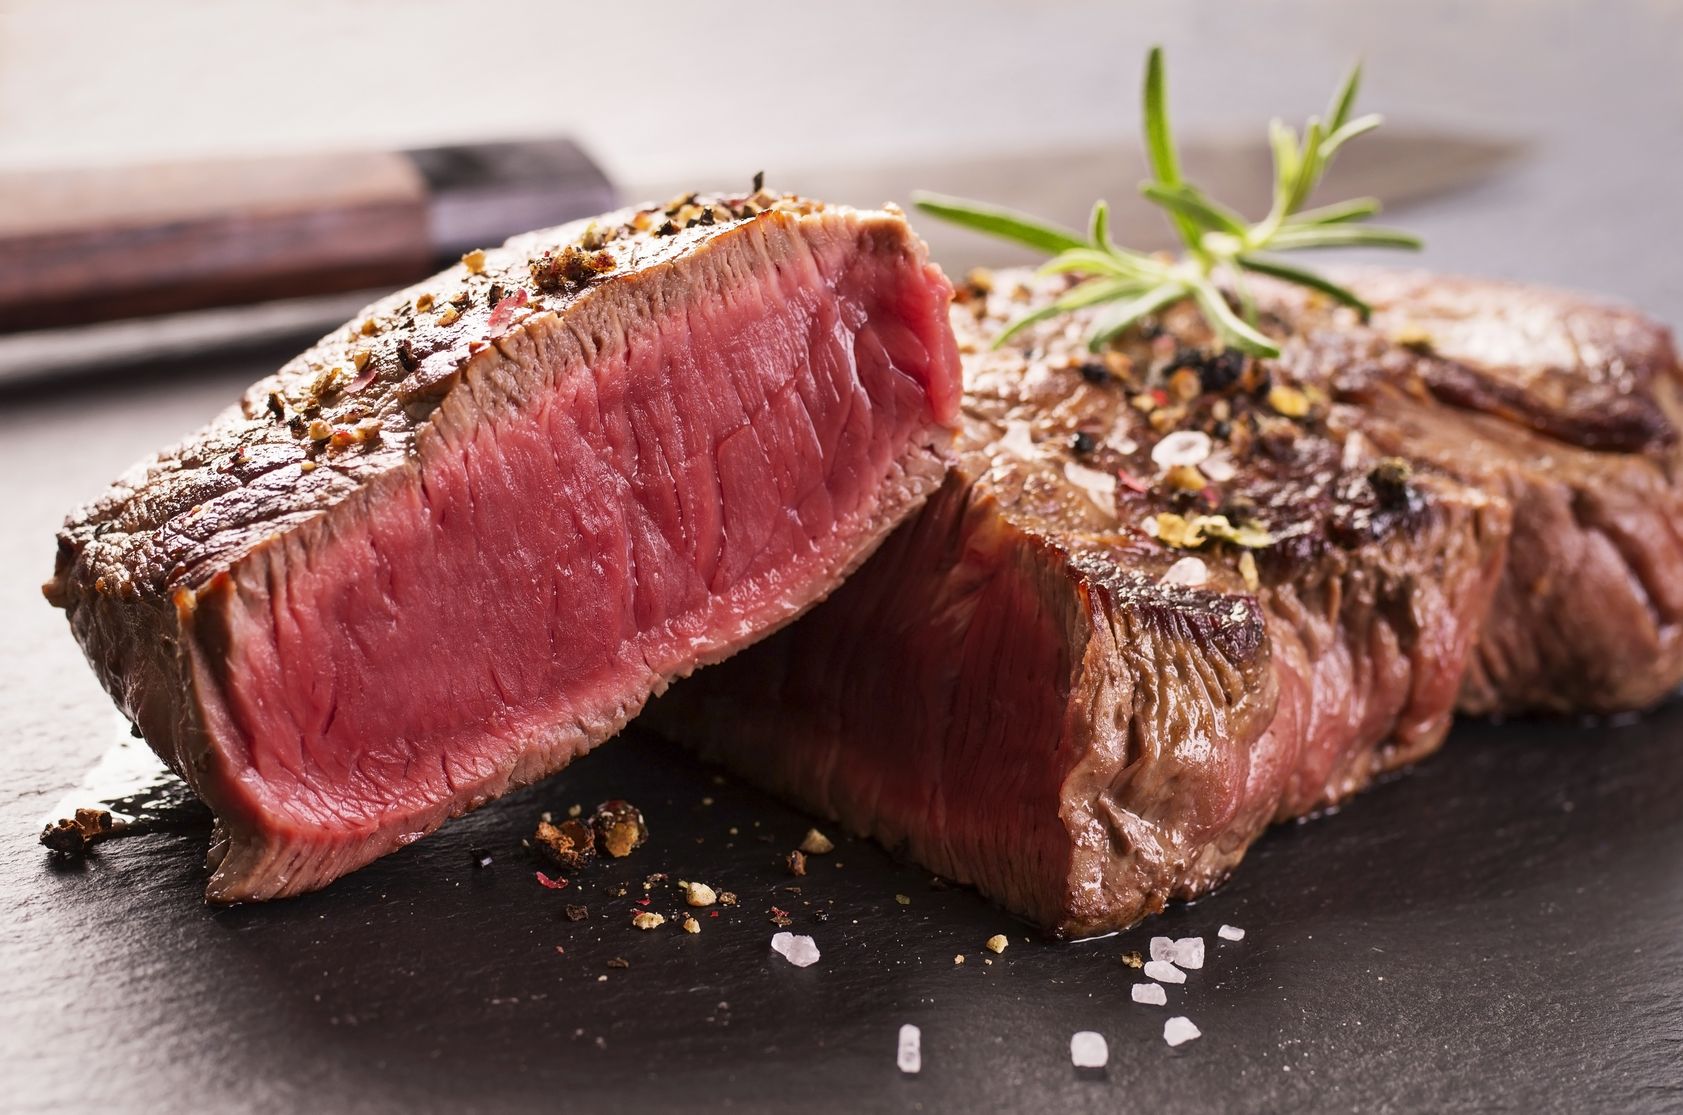 How to cook the perfect steak